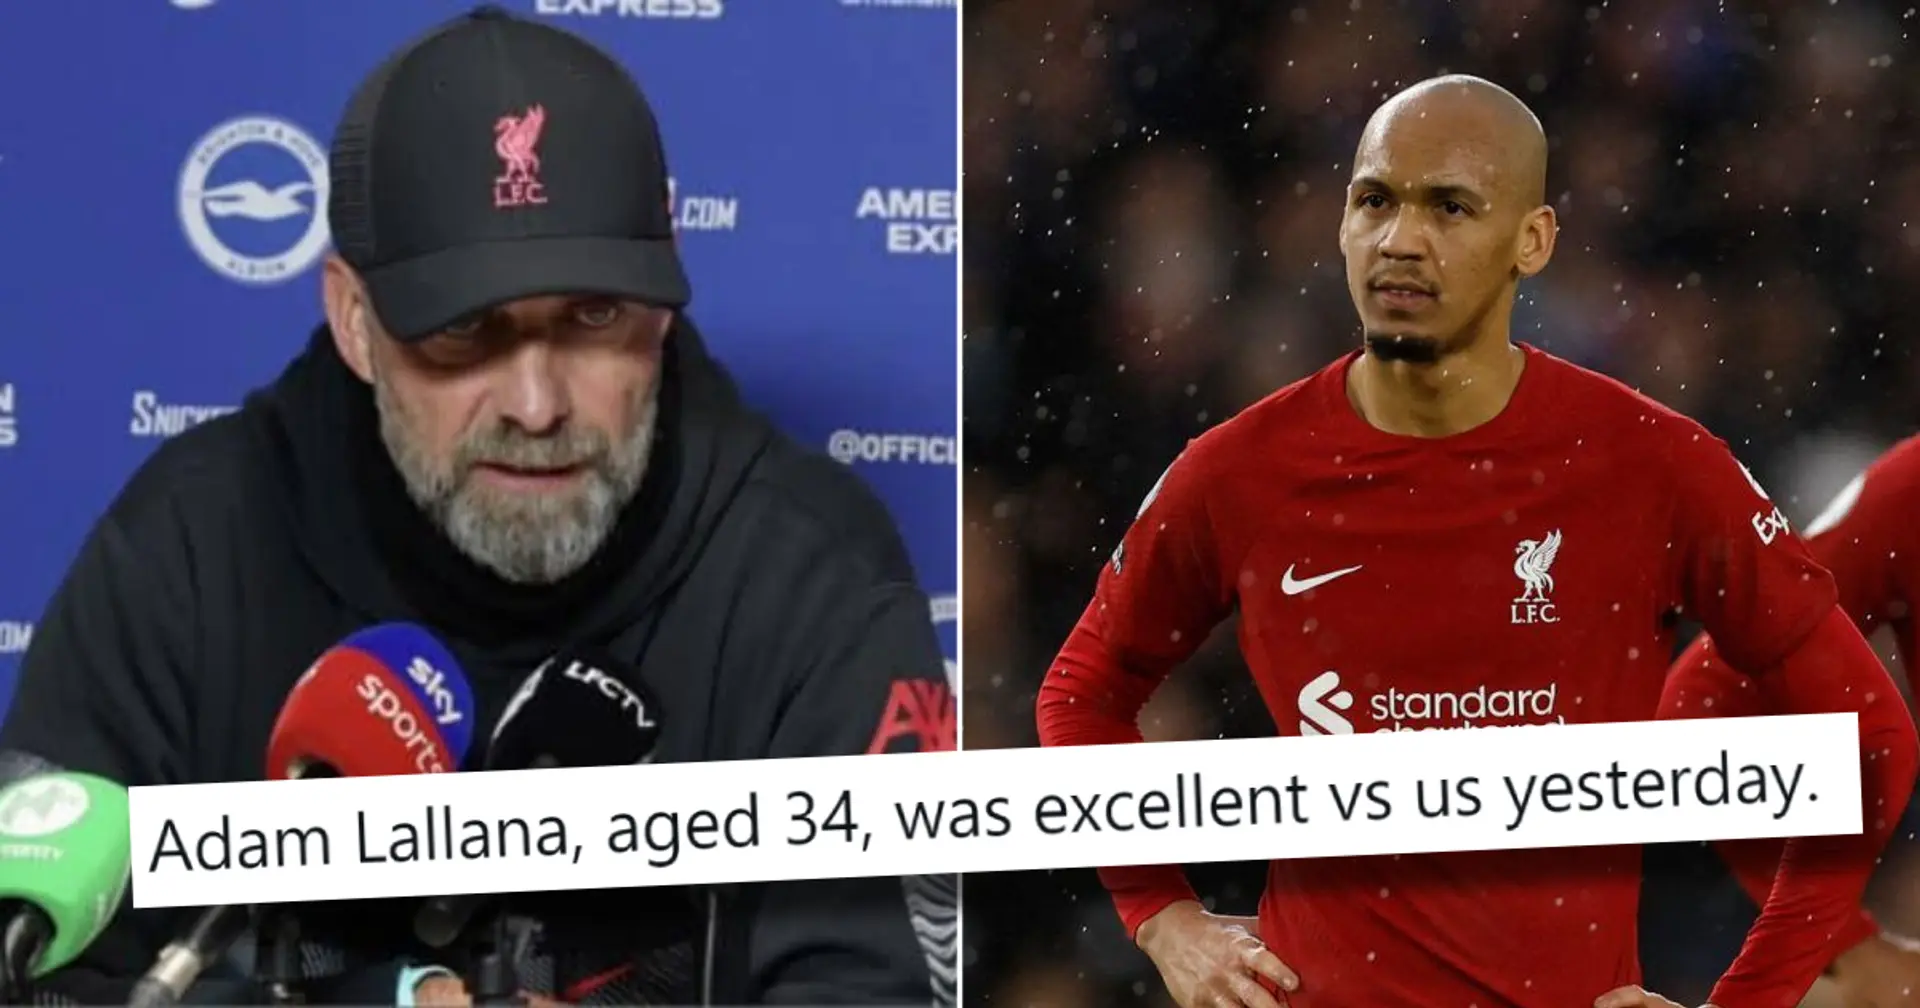 'Football isn't all about physicality': data analyst slams claims that Liverpool decline is due to 'past-peak' midfield